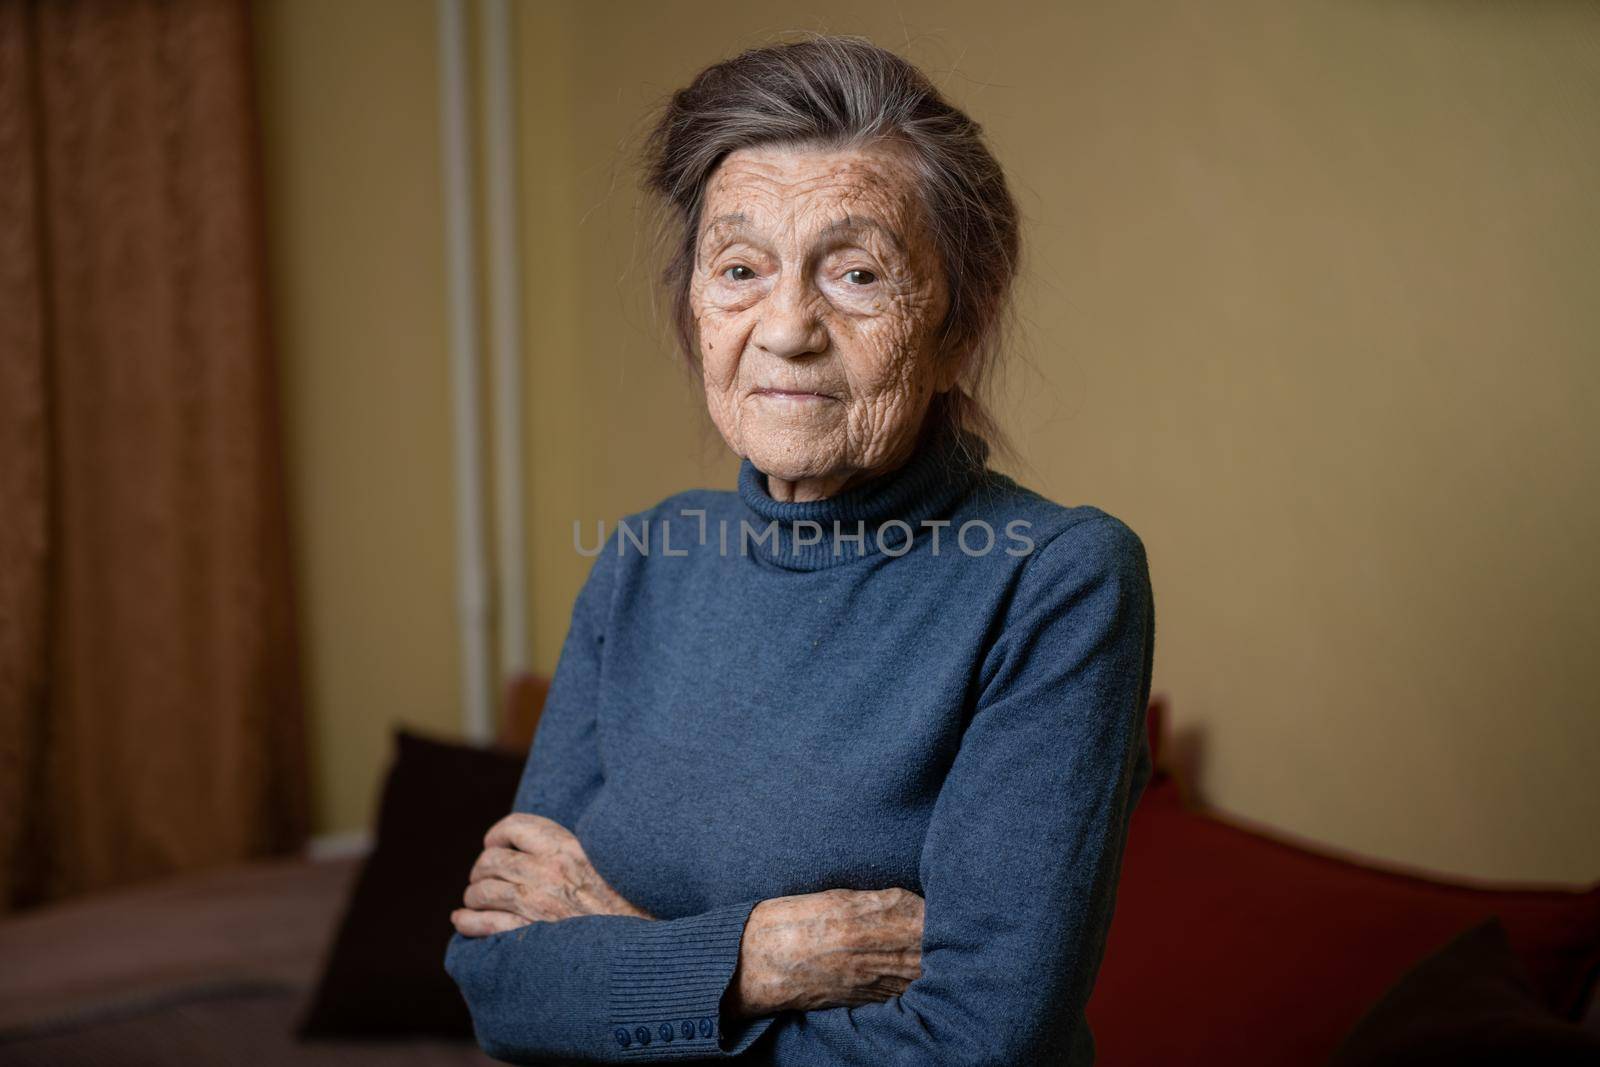 90 year old cute elderly woman with gray hair and wrinkles face, wearing sweater, portrait large, smiling and looking joyfully, background of room. Theme long-liver and aging, old people in good mood by Tomashevska